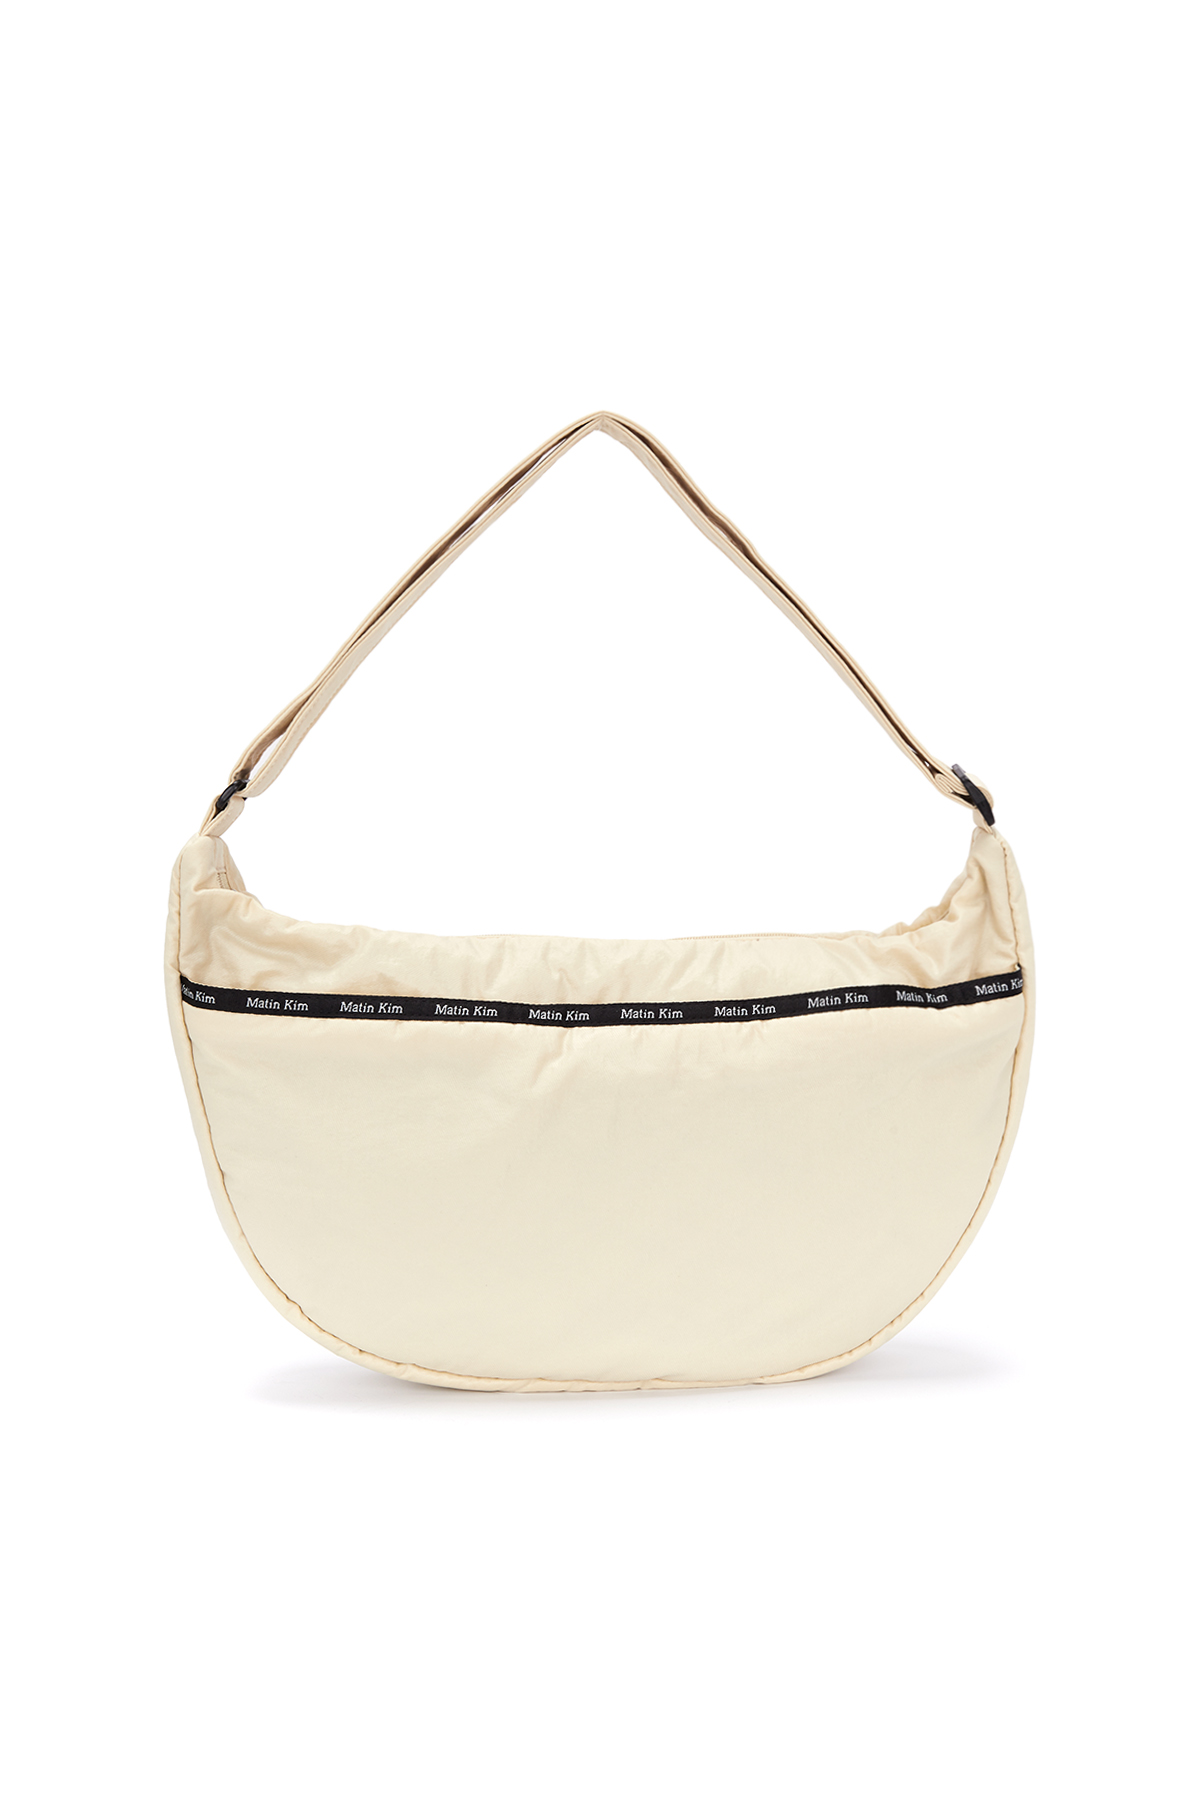 GLOSSY FABRIC ROUND CROSS BAG IN BEIGE